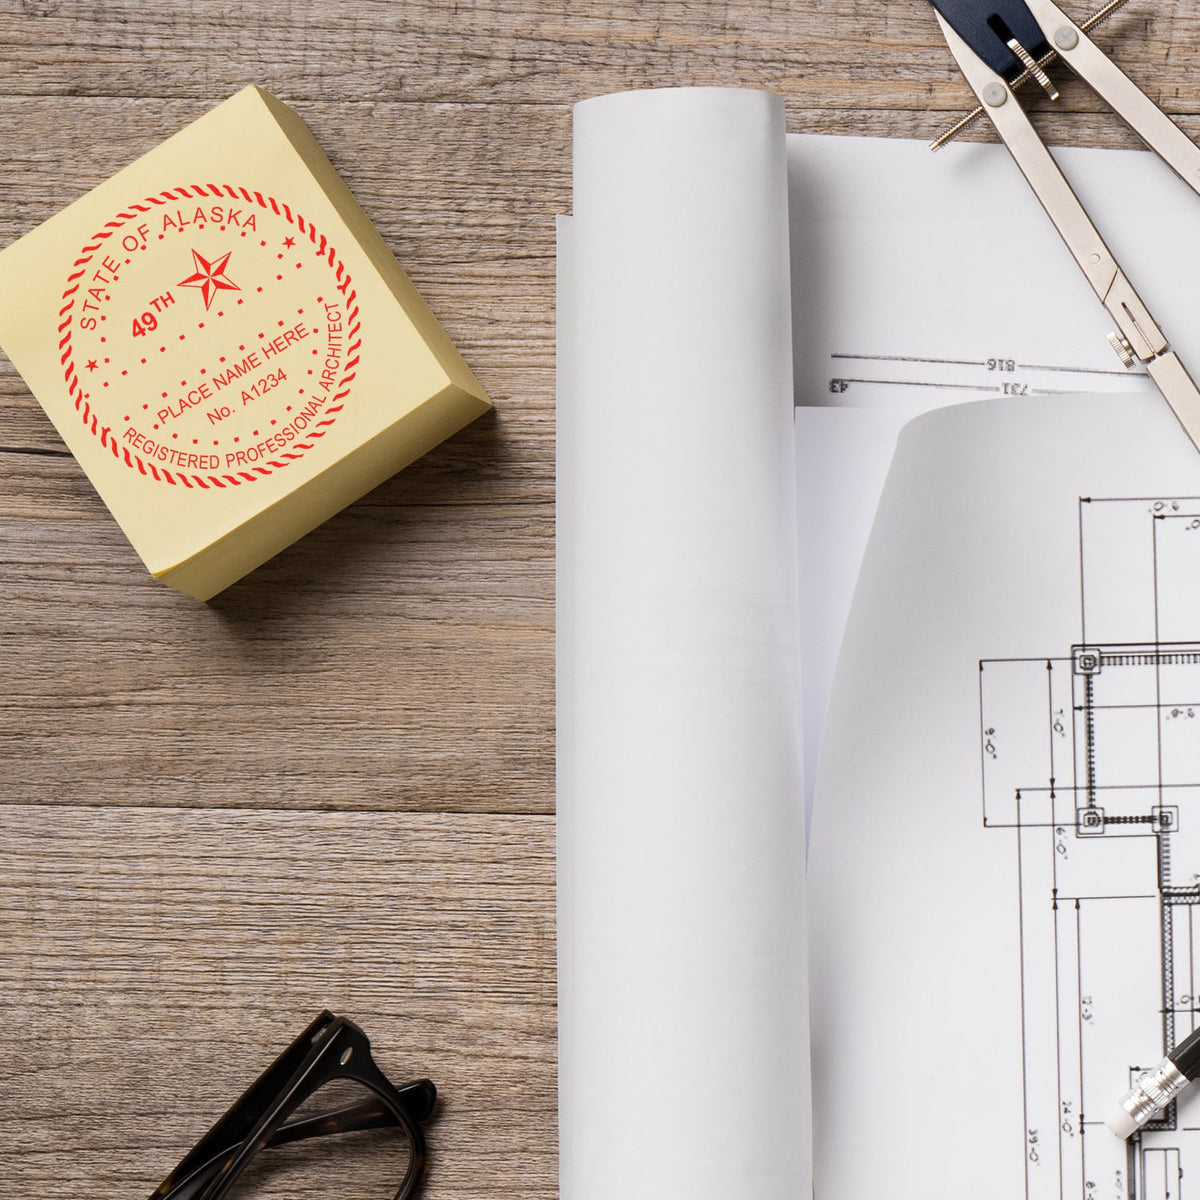 The Slim Pre-Inked Alaska Architect Seal Stamp stamp impression comes to life with a crisp, detailed photo on paper - showcasing true professional quality.